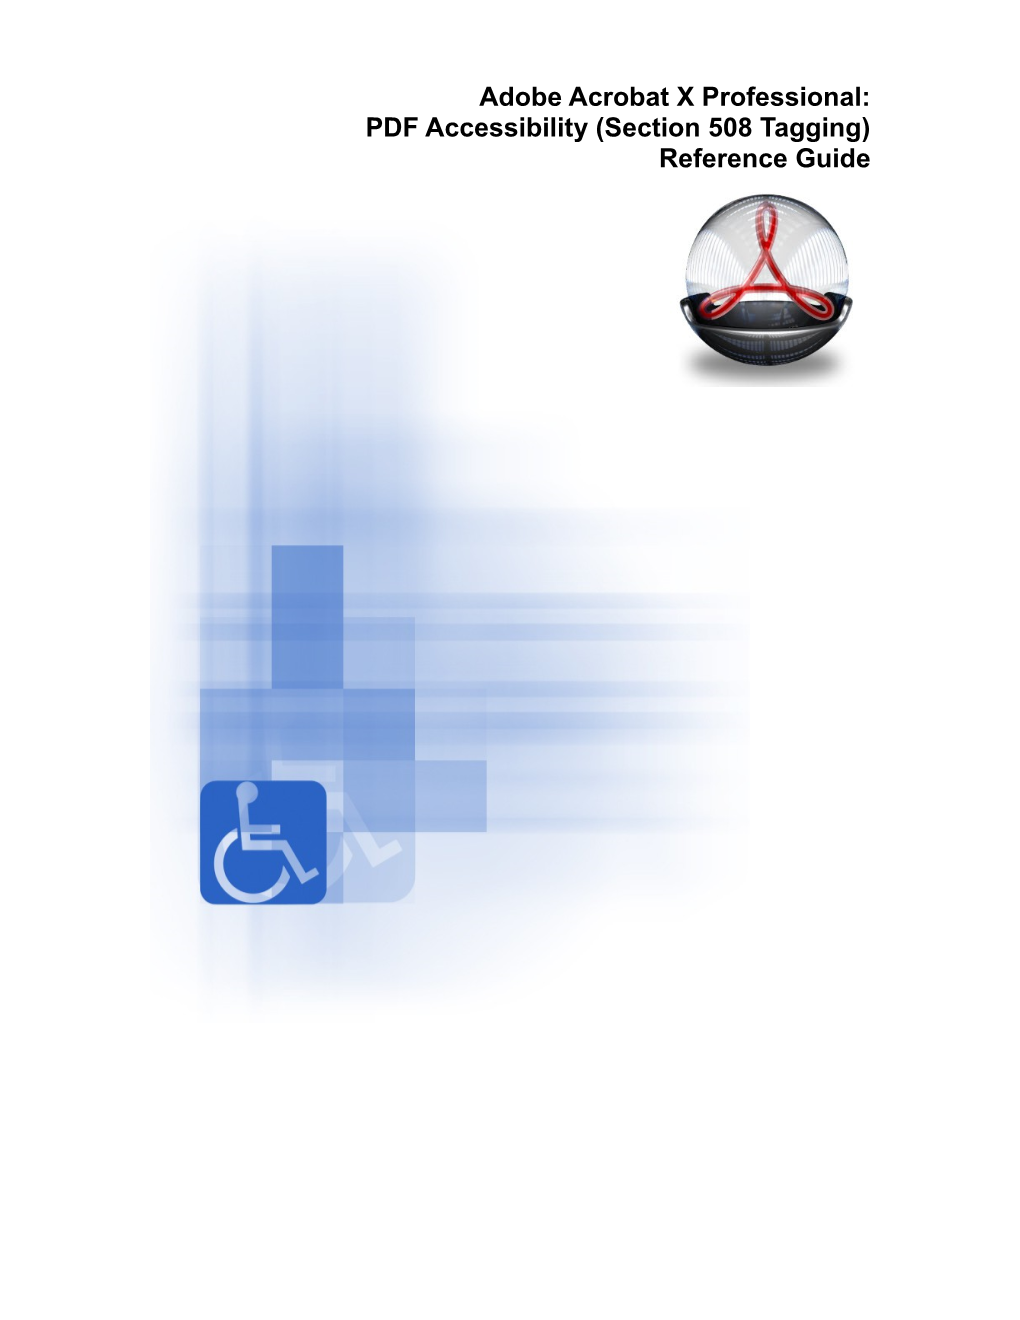 Adobe Acrobat X Professional: PDF Accessibility (Section 508 Tagging) Reference Guide